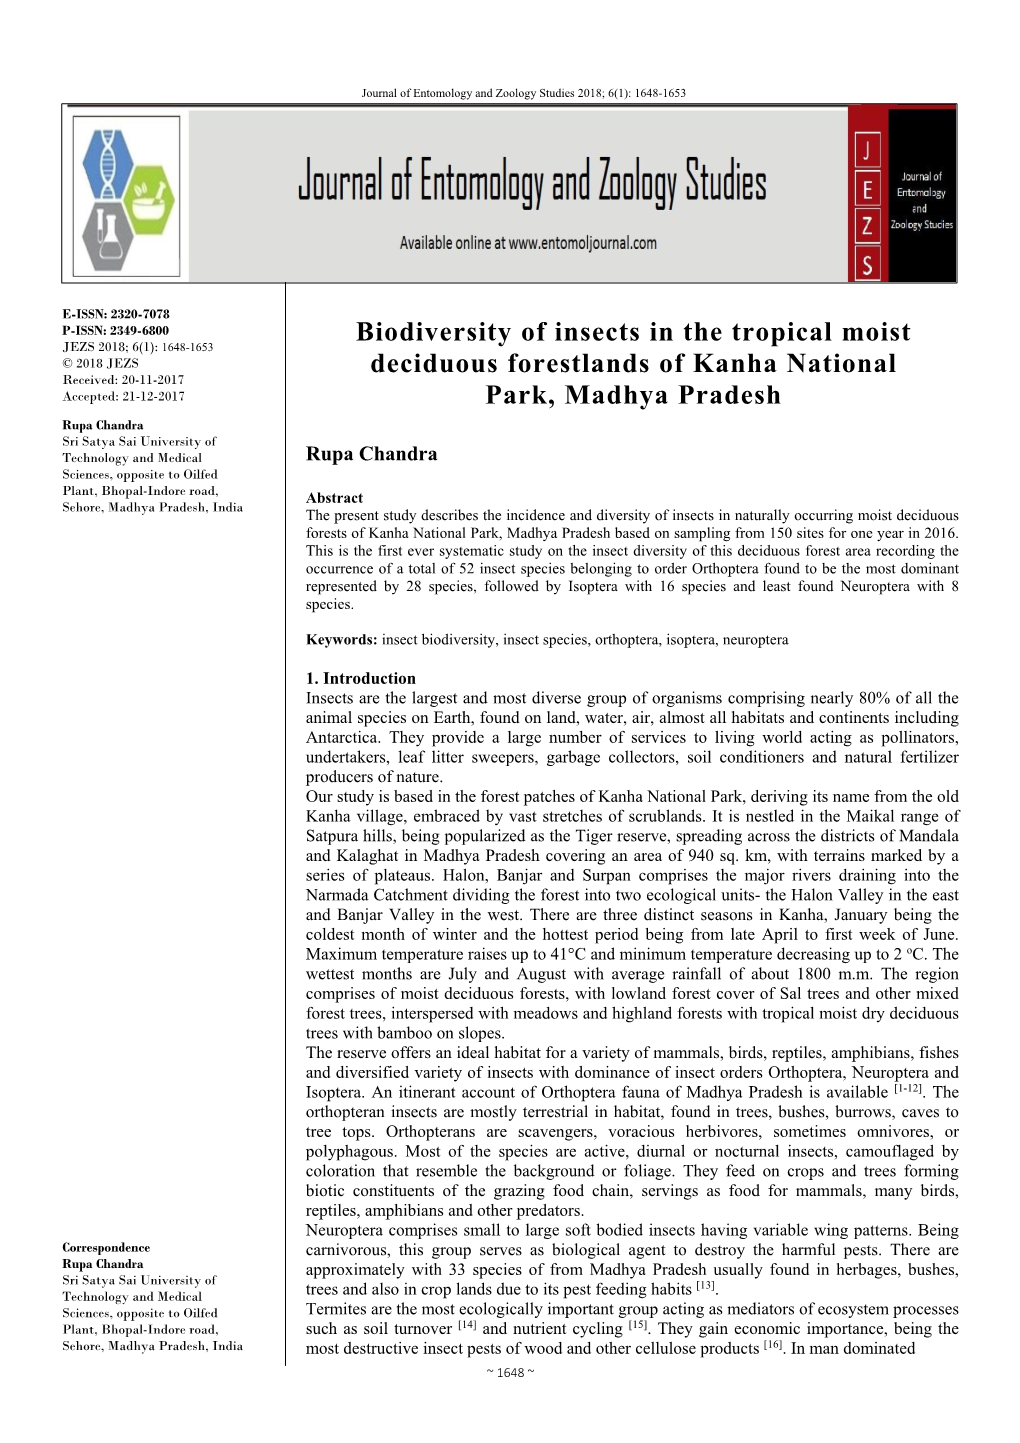 Biodiversity of Insects in the Tropical Moist Deciduous Forestlands Of